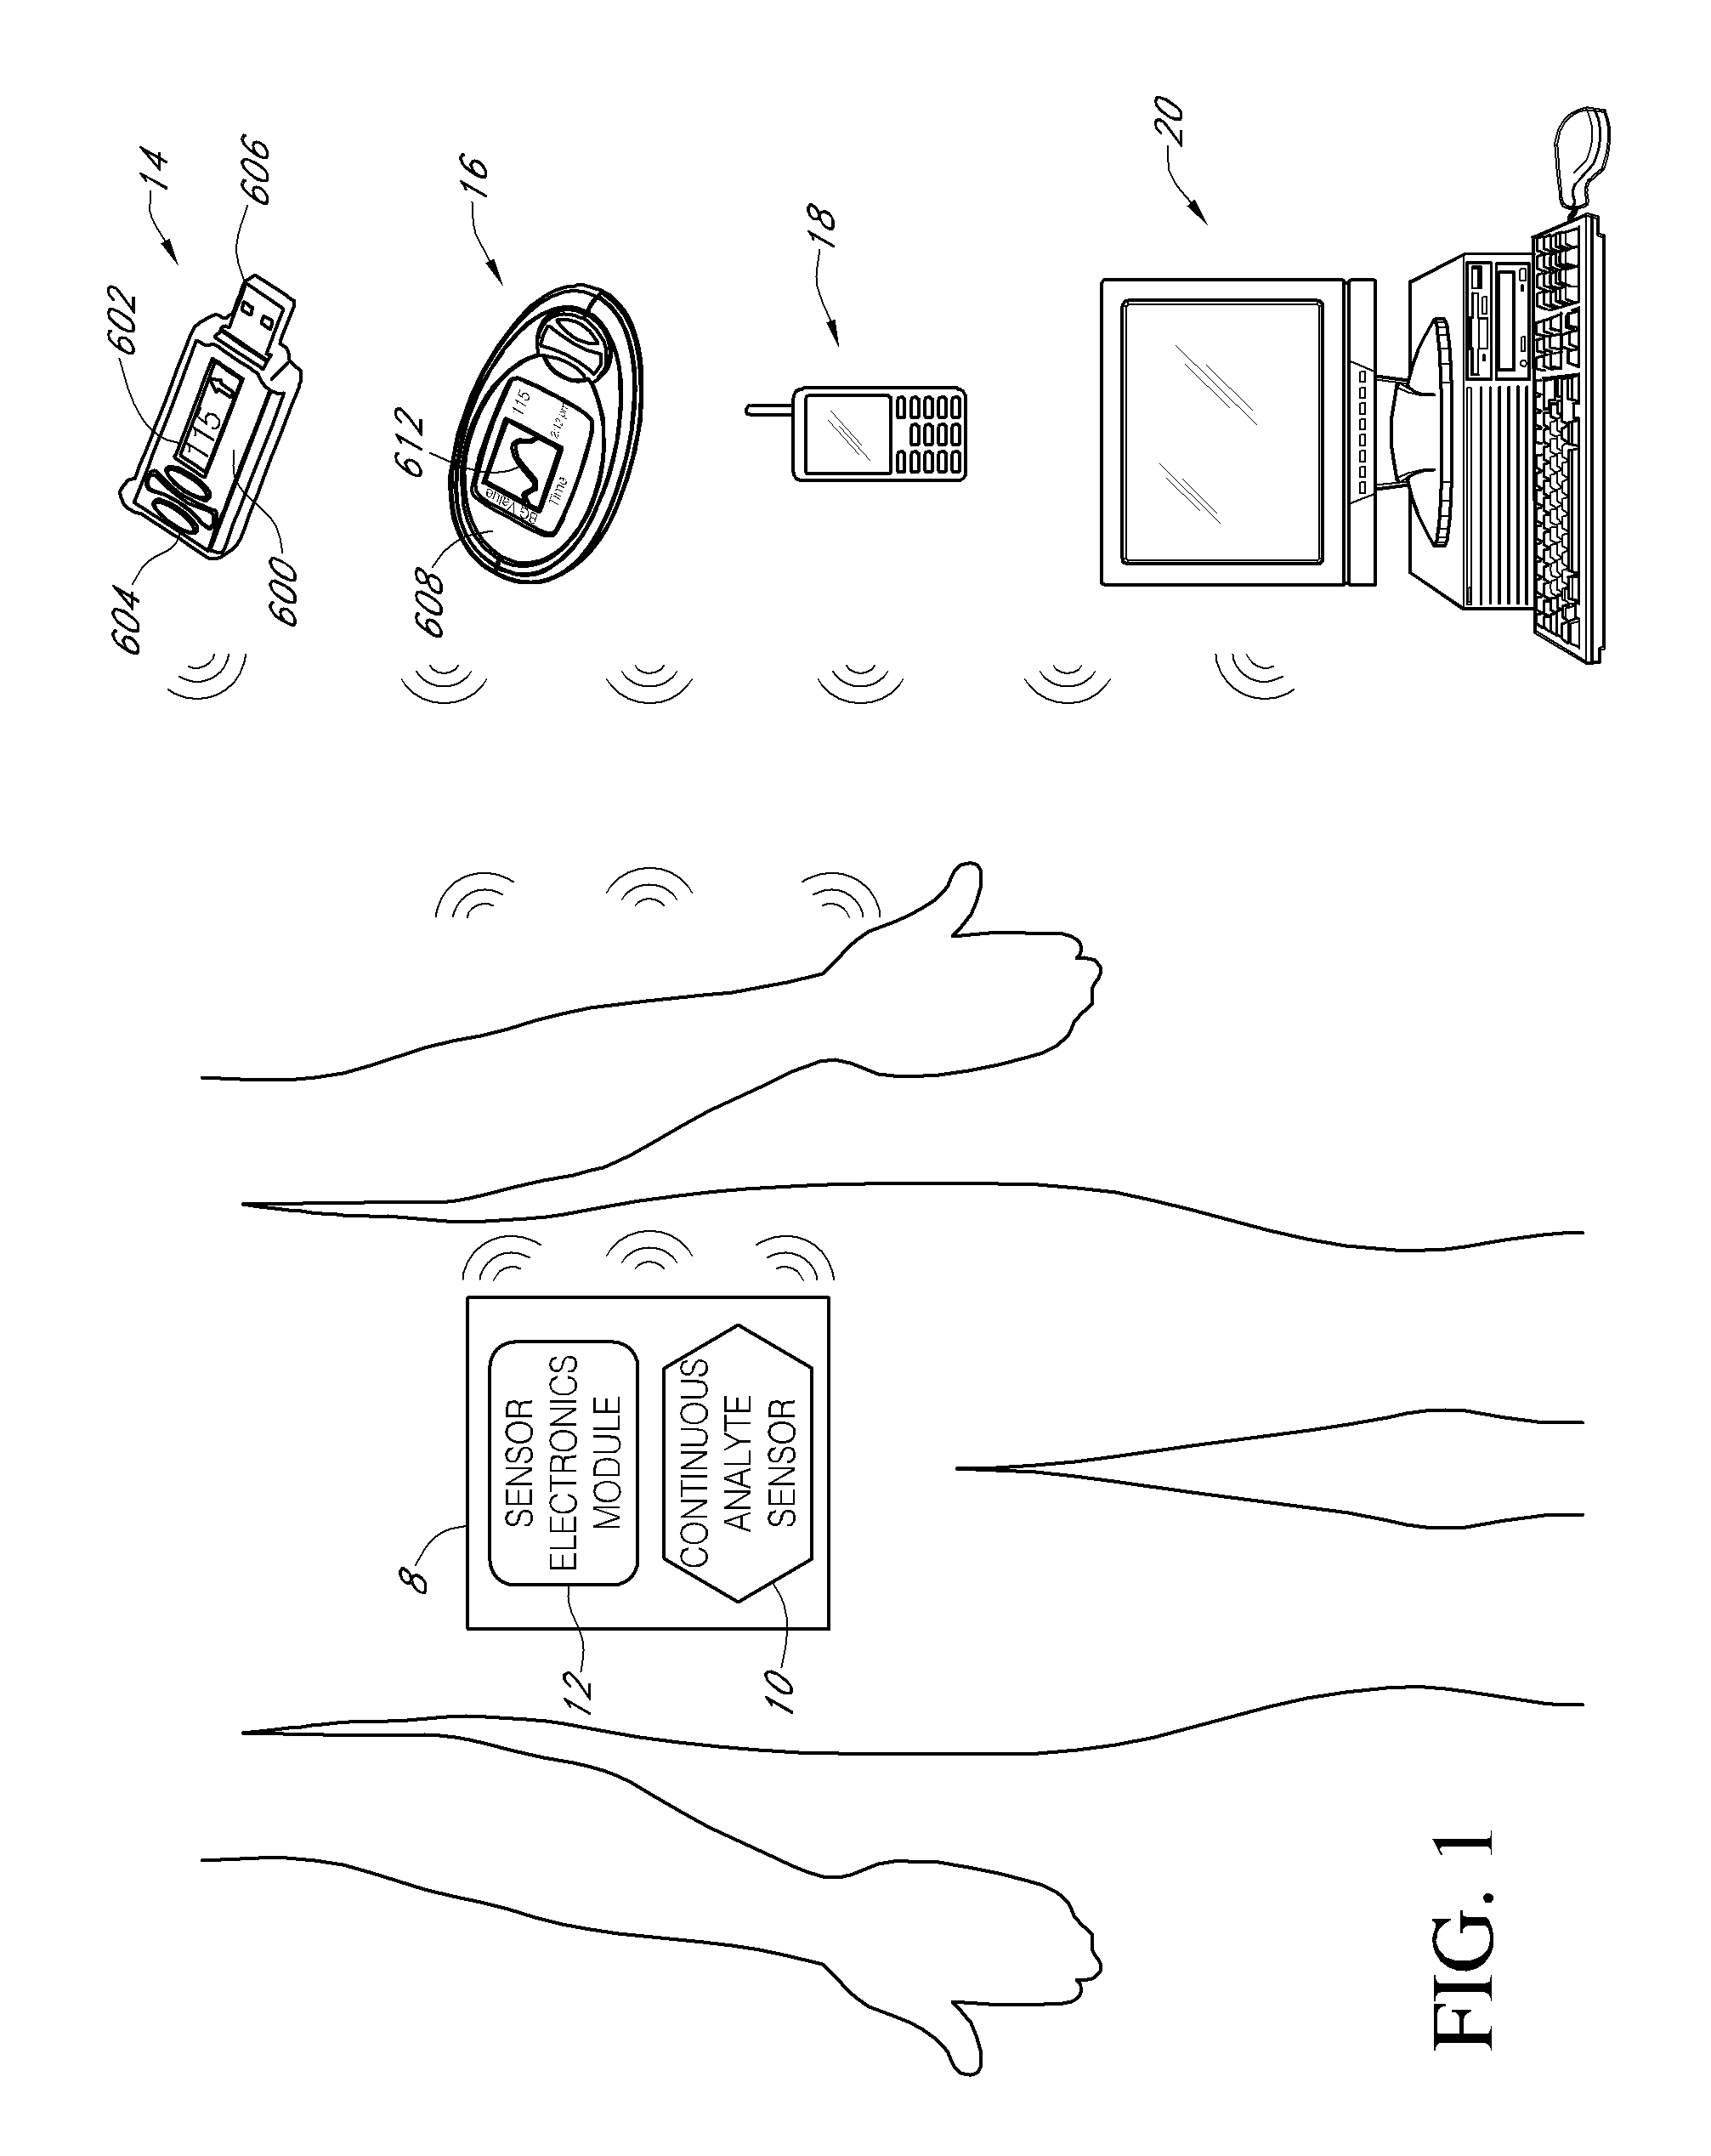 Systems and methods for processing, transmitting and displaying sensor data